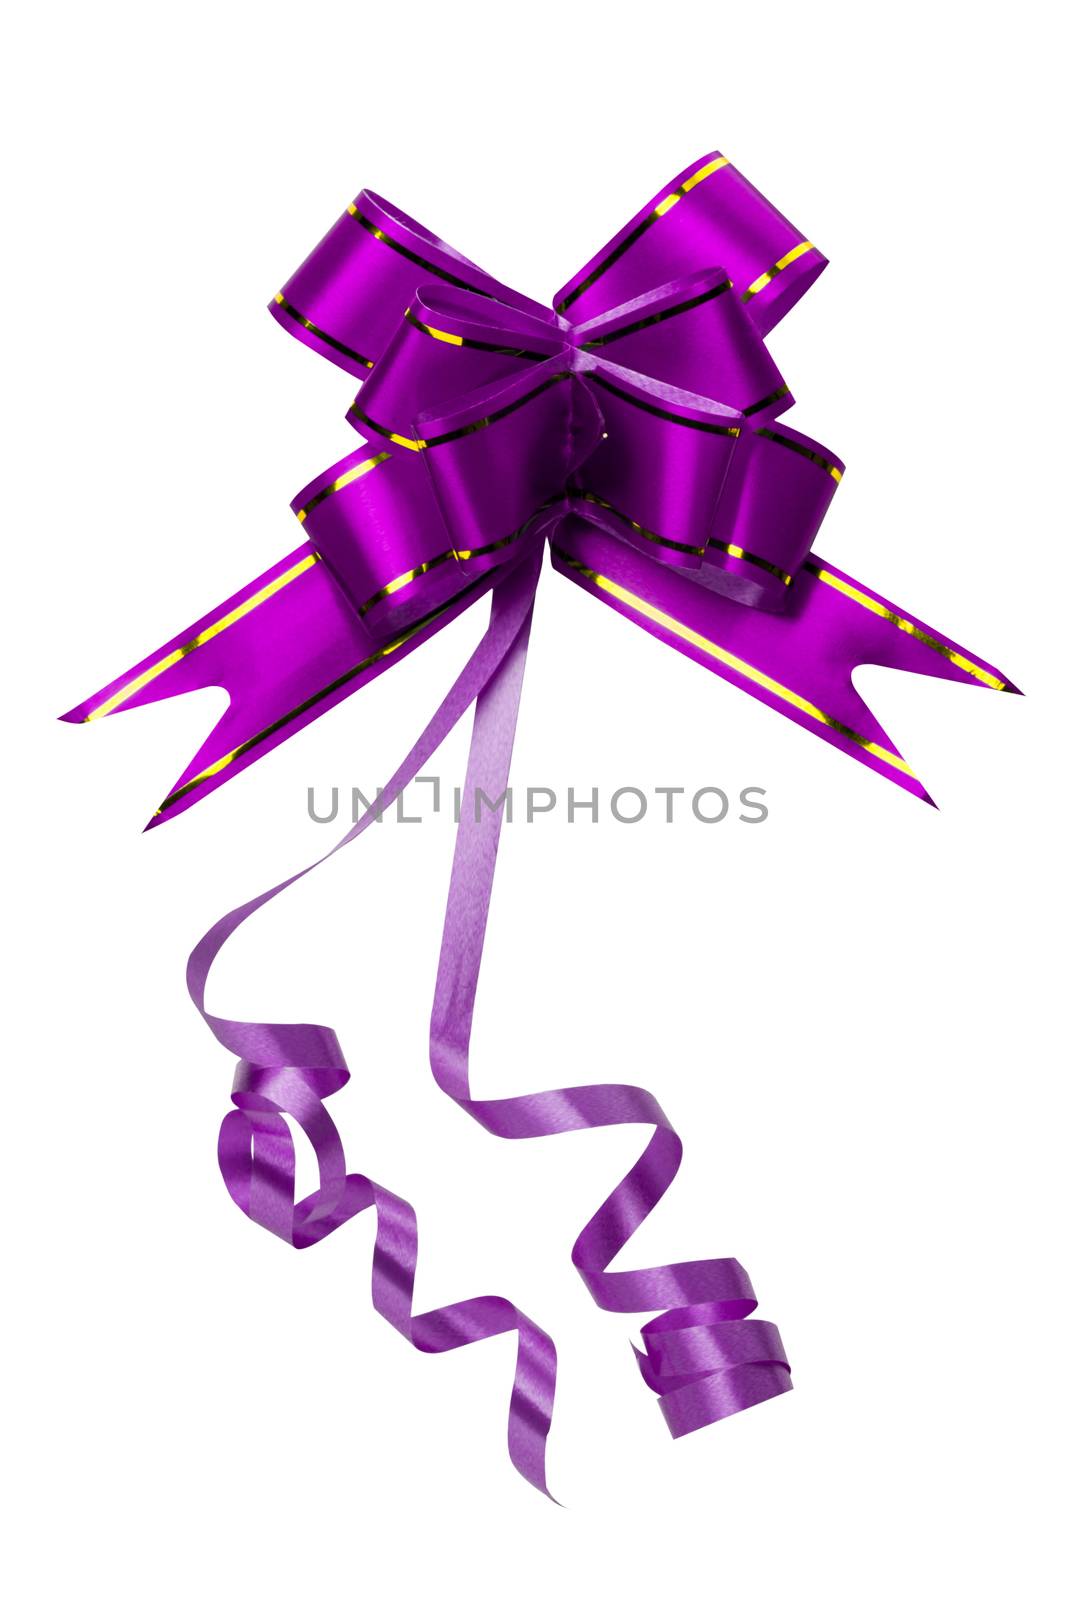 Shiny purple and gold bow isolated on white background with copy space. Ribbon for gift or present concept. Happy New year decorative ribbon and party ornament concept.